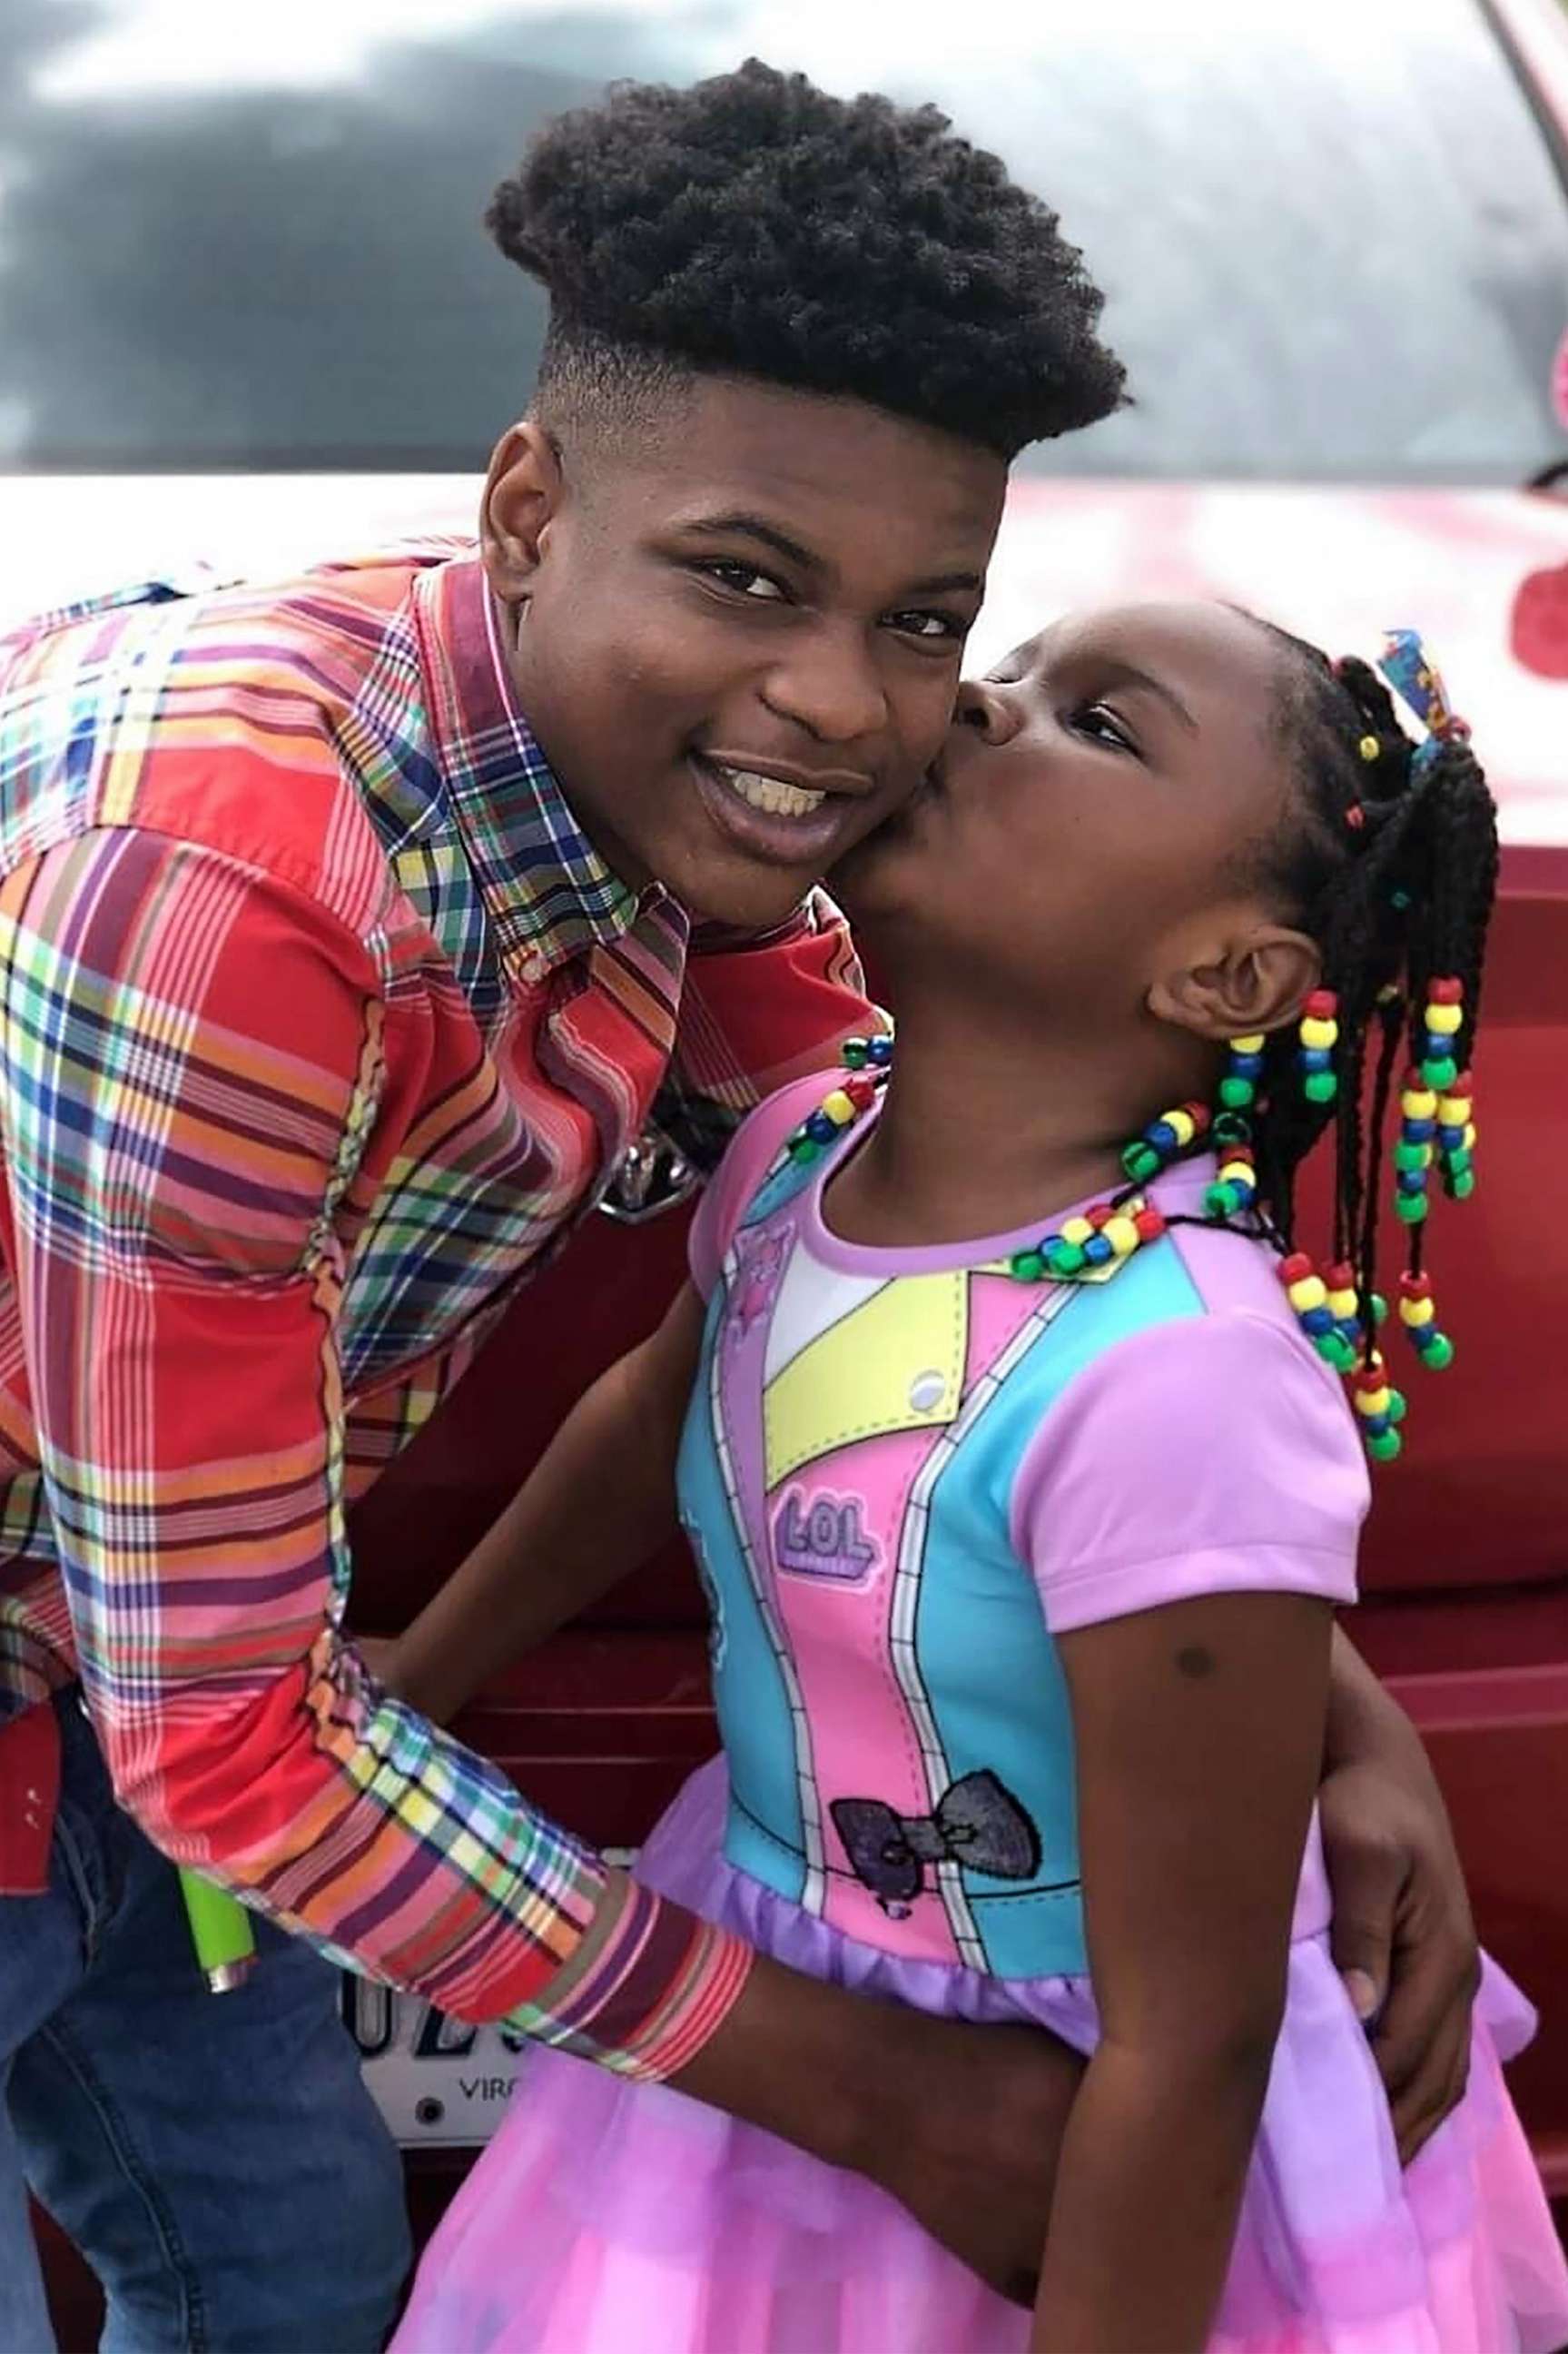 PHOTO: Shawn Jackson and his 9 year old sister